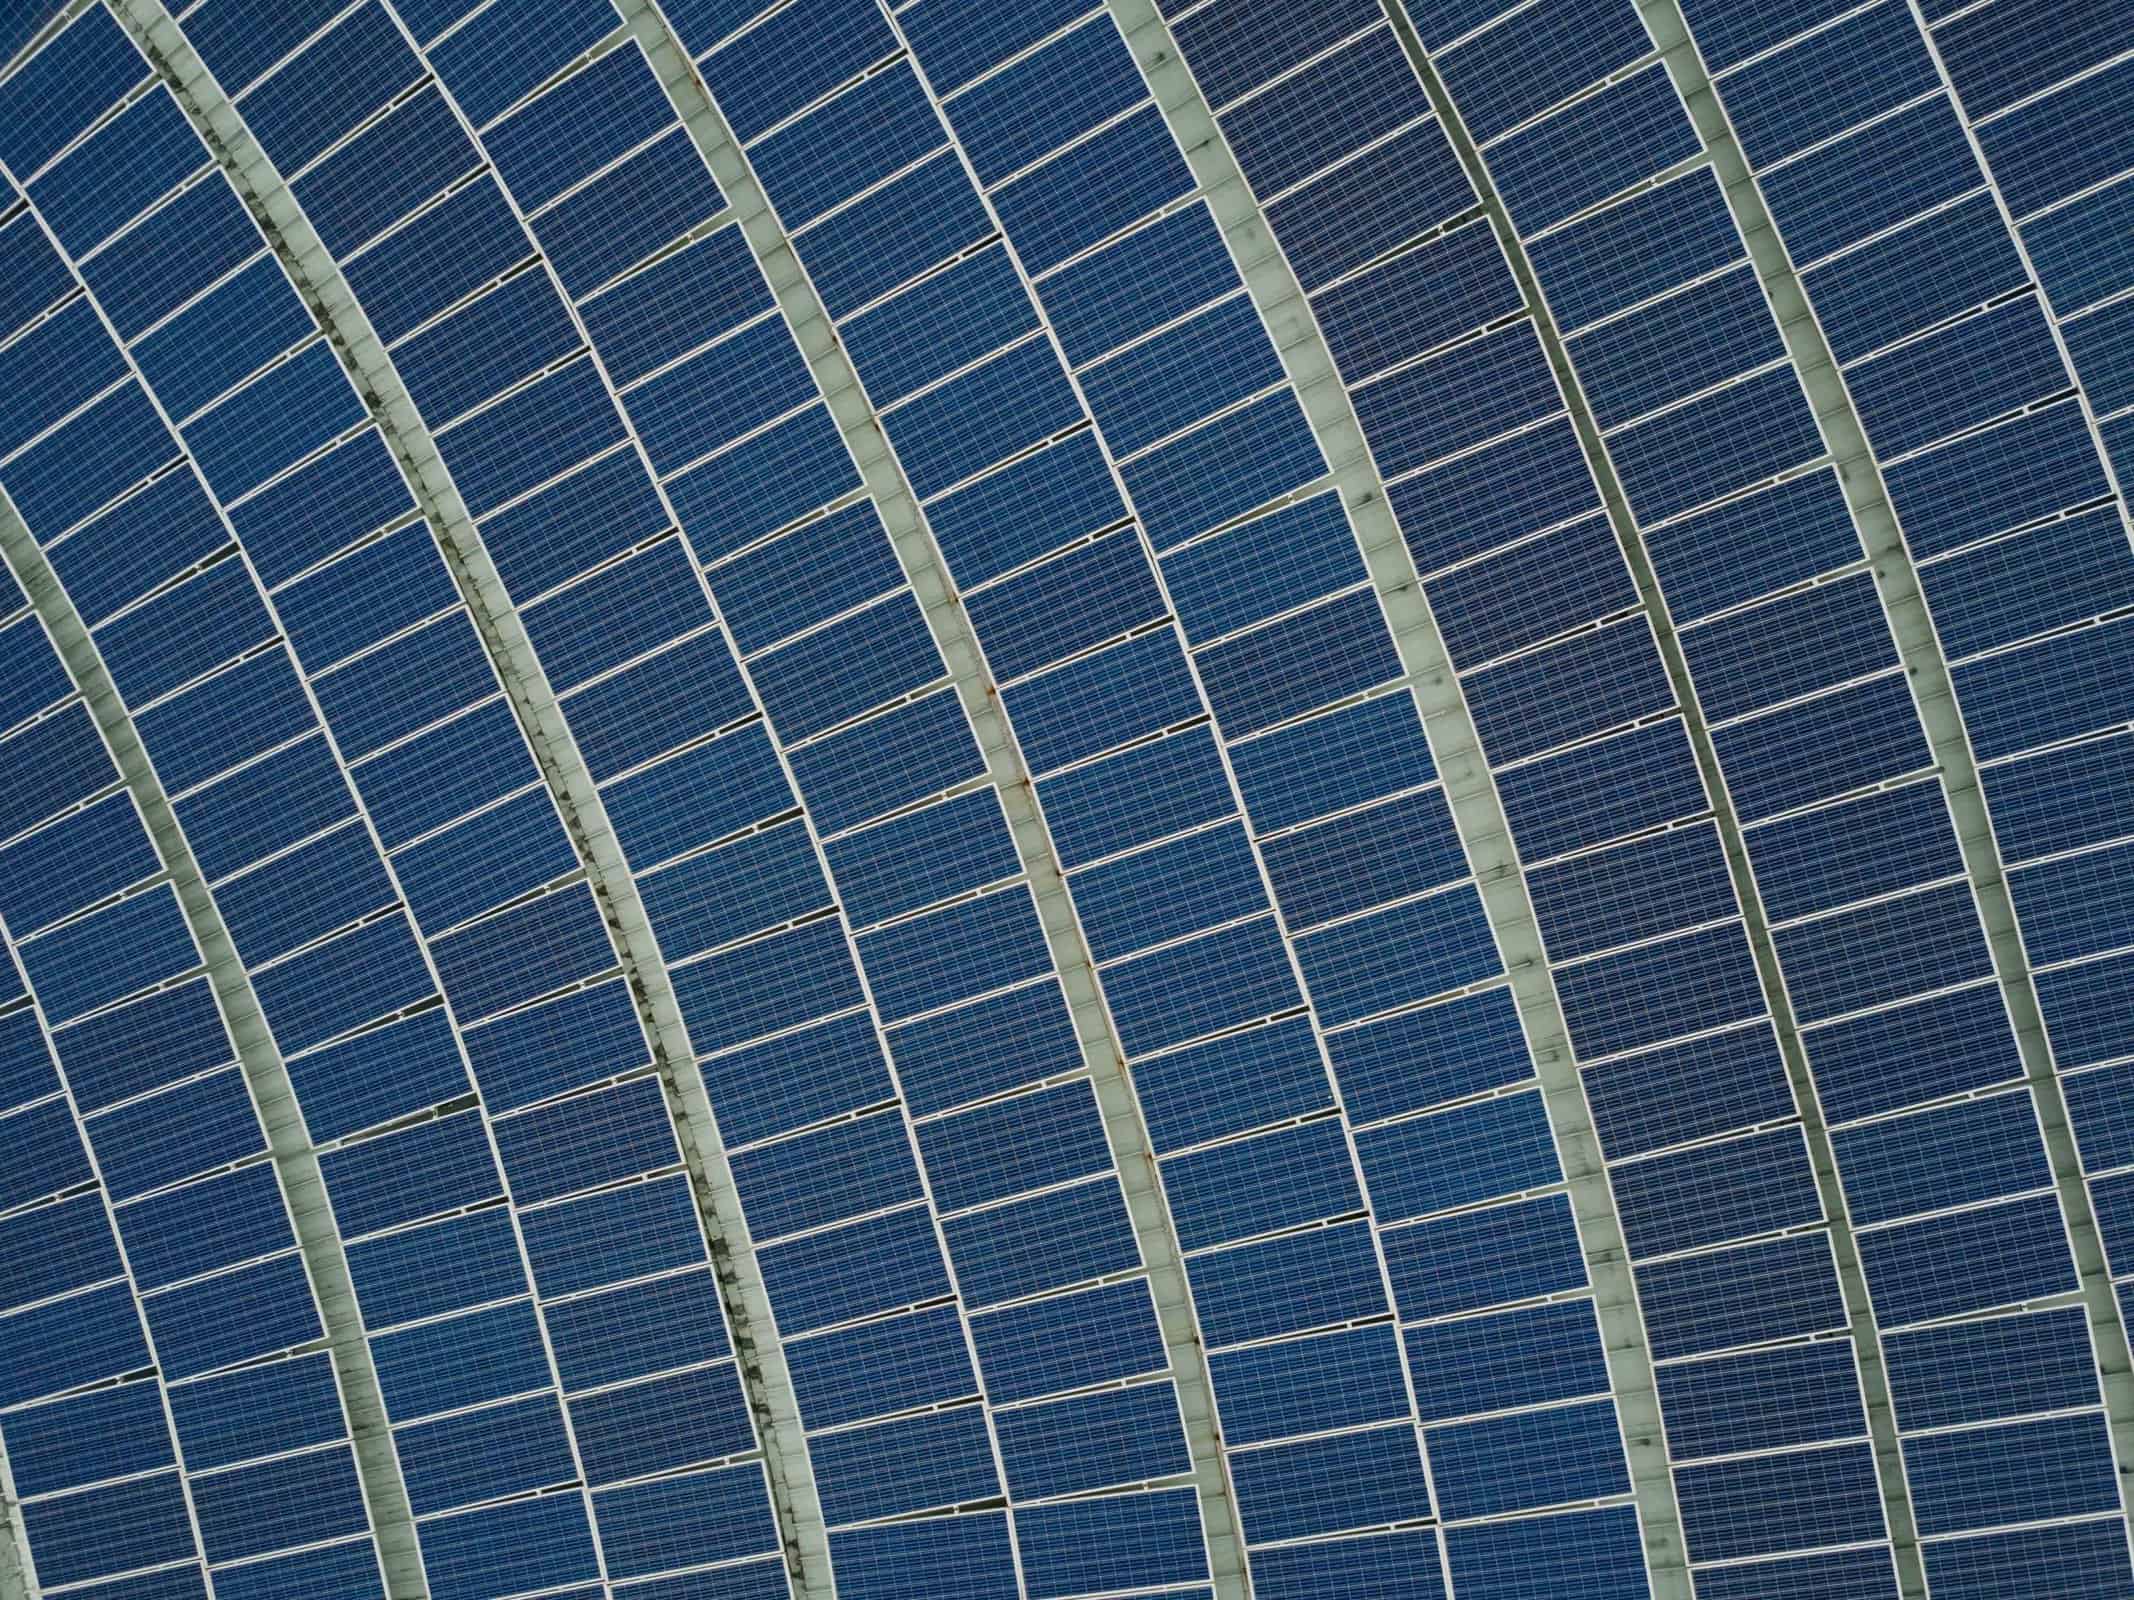 Aerial view of solar panel arrays